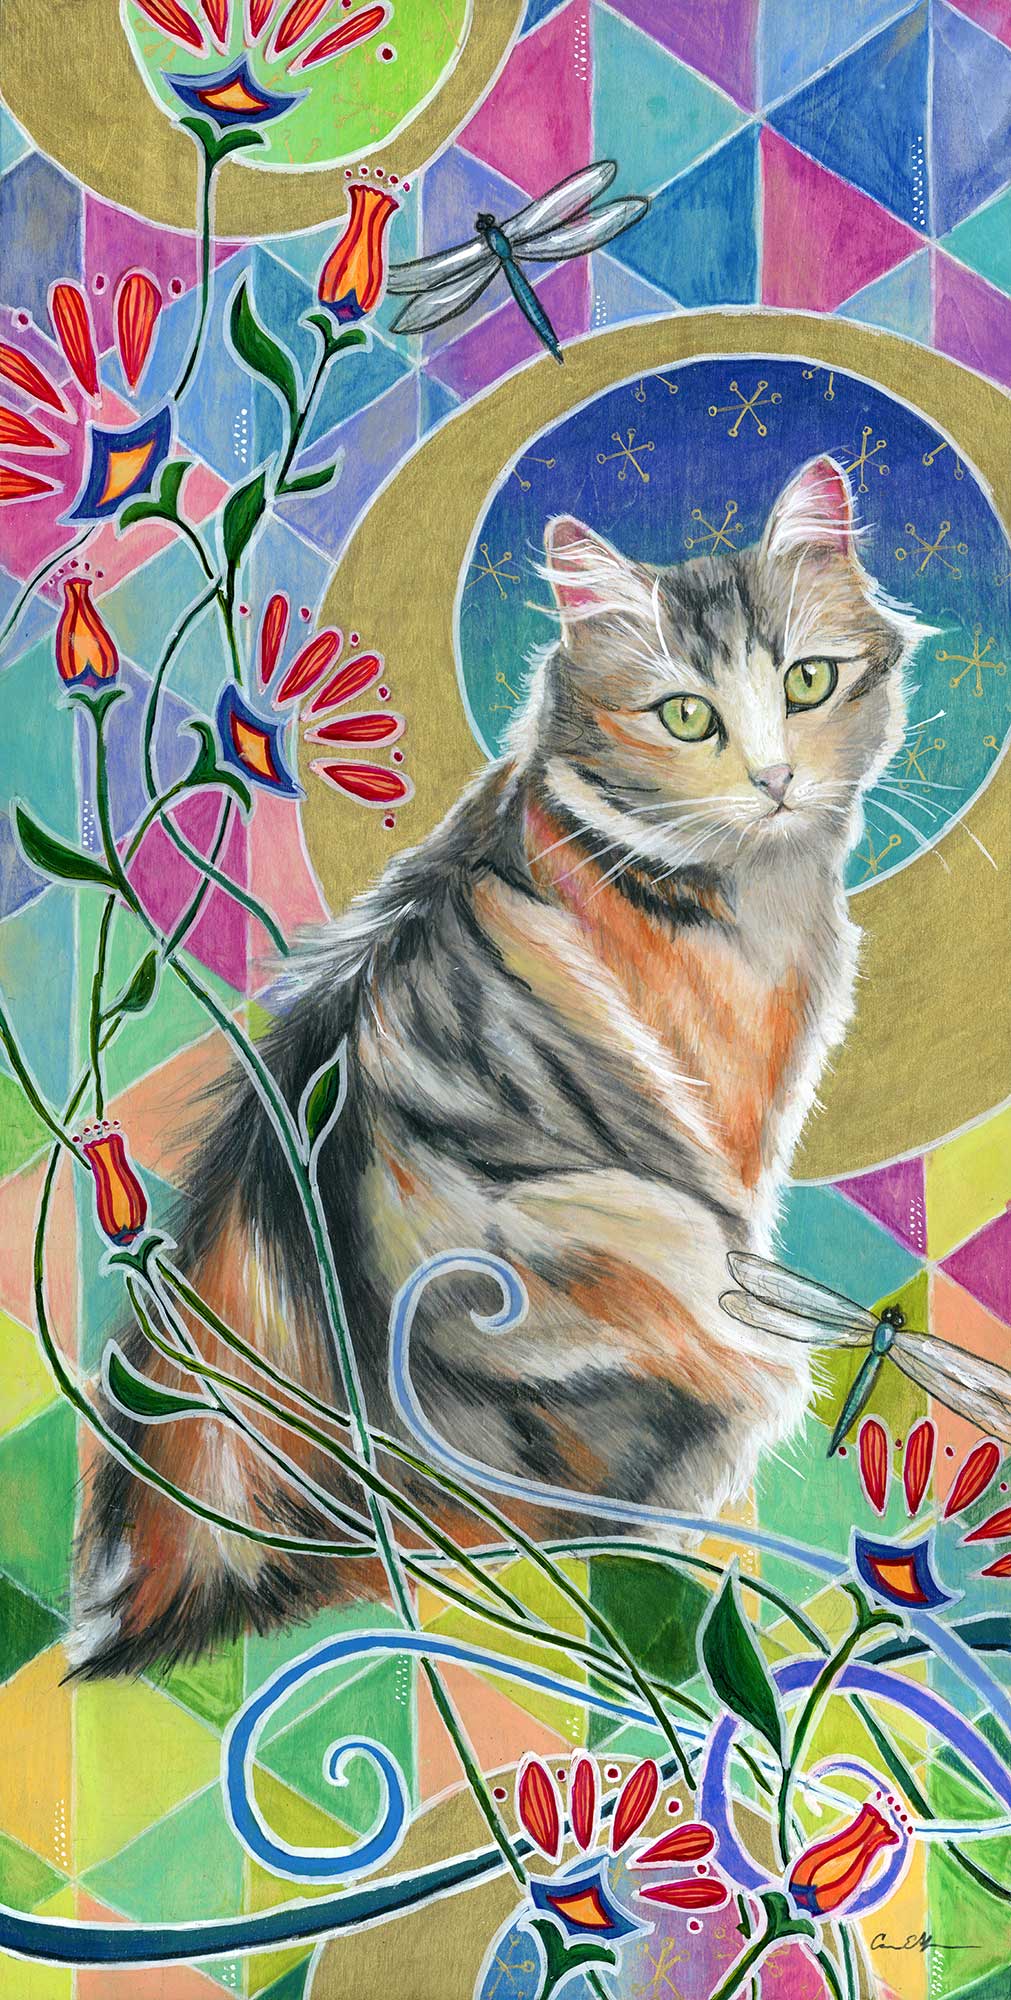 SOLD - "Calico and Dragonflies", 12" x 24", mixed media